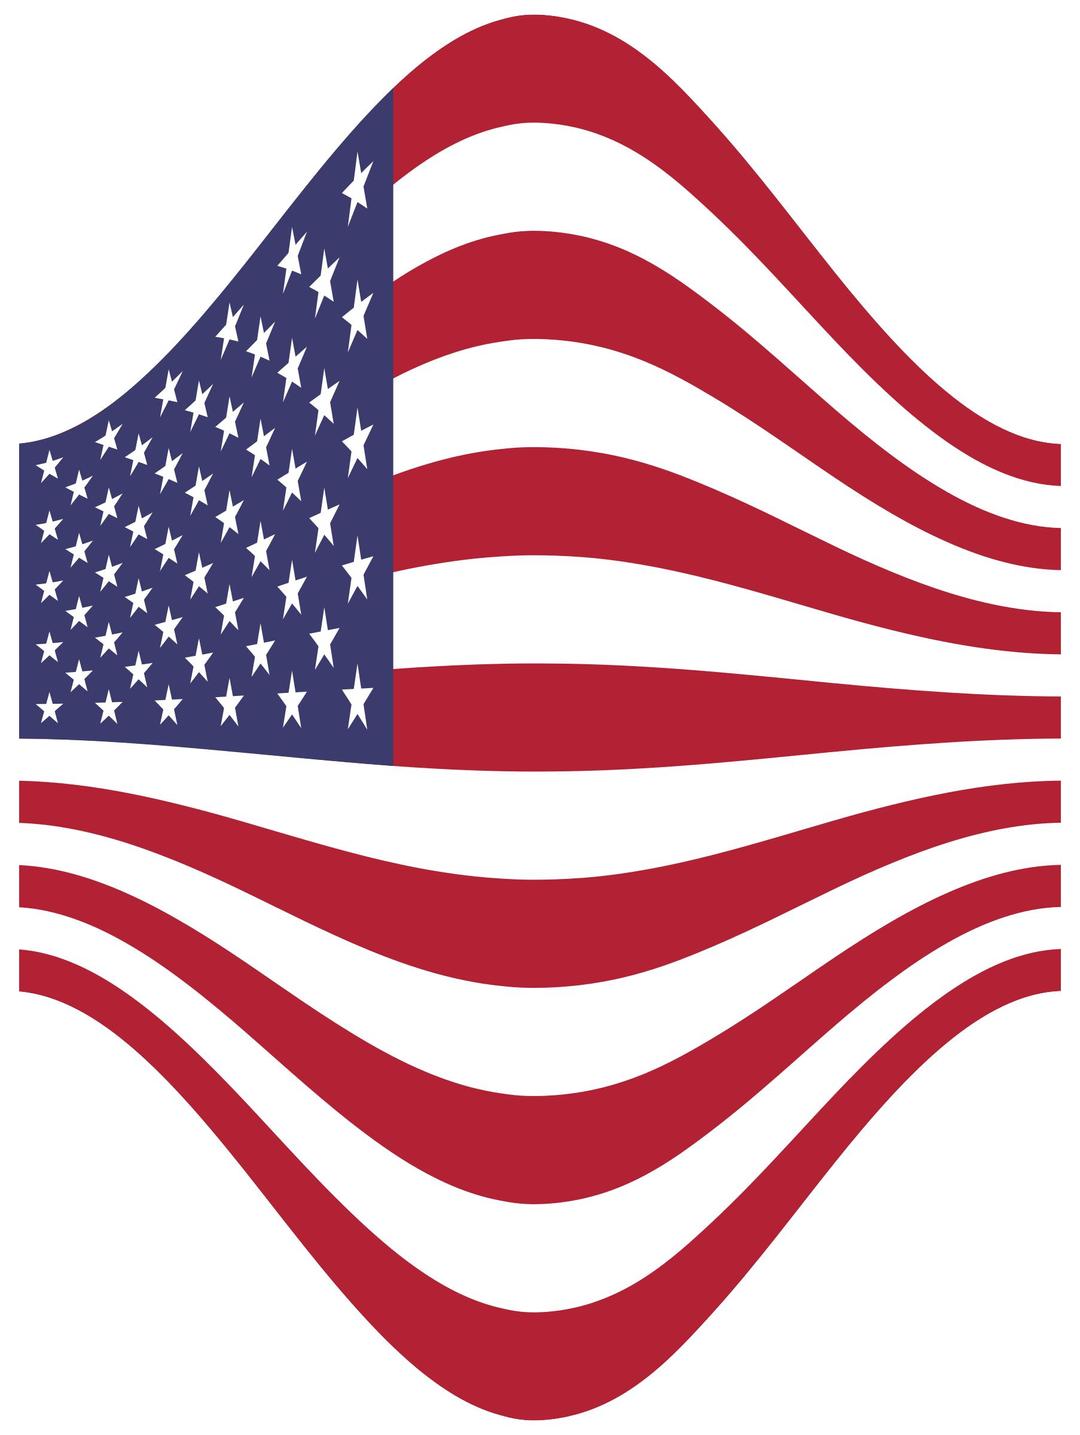 America USA Flag Perspective 3 png transparent